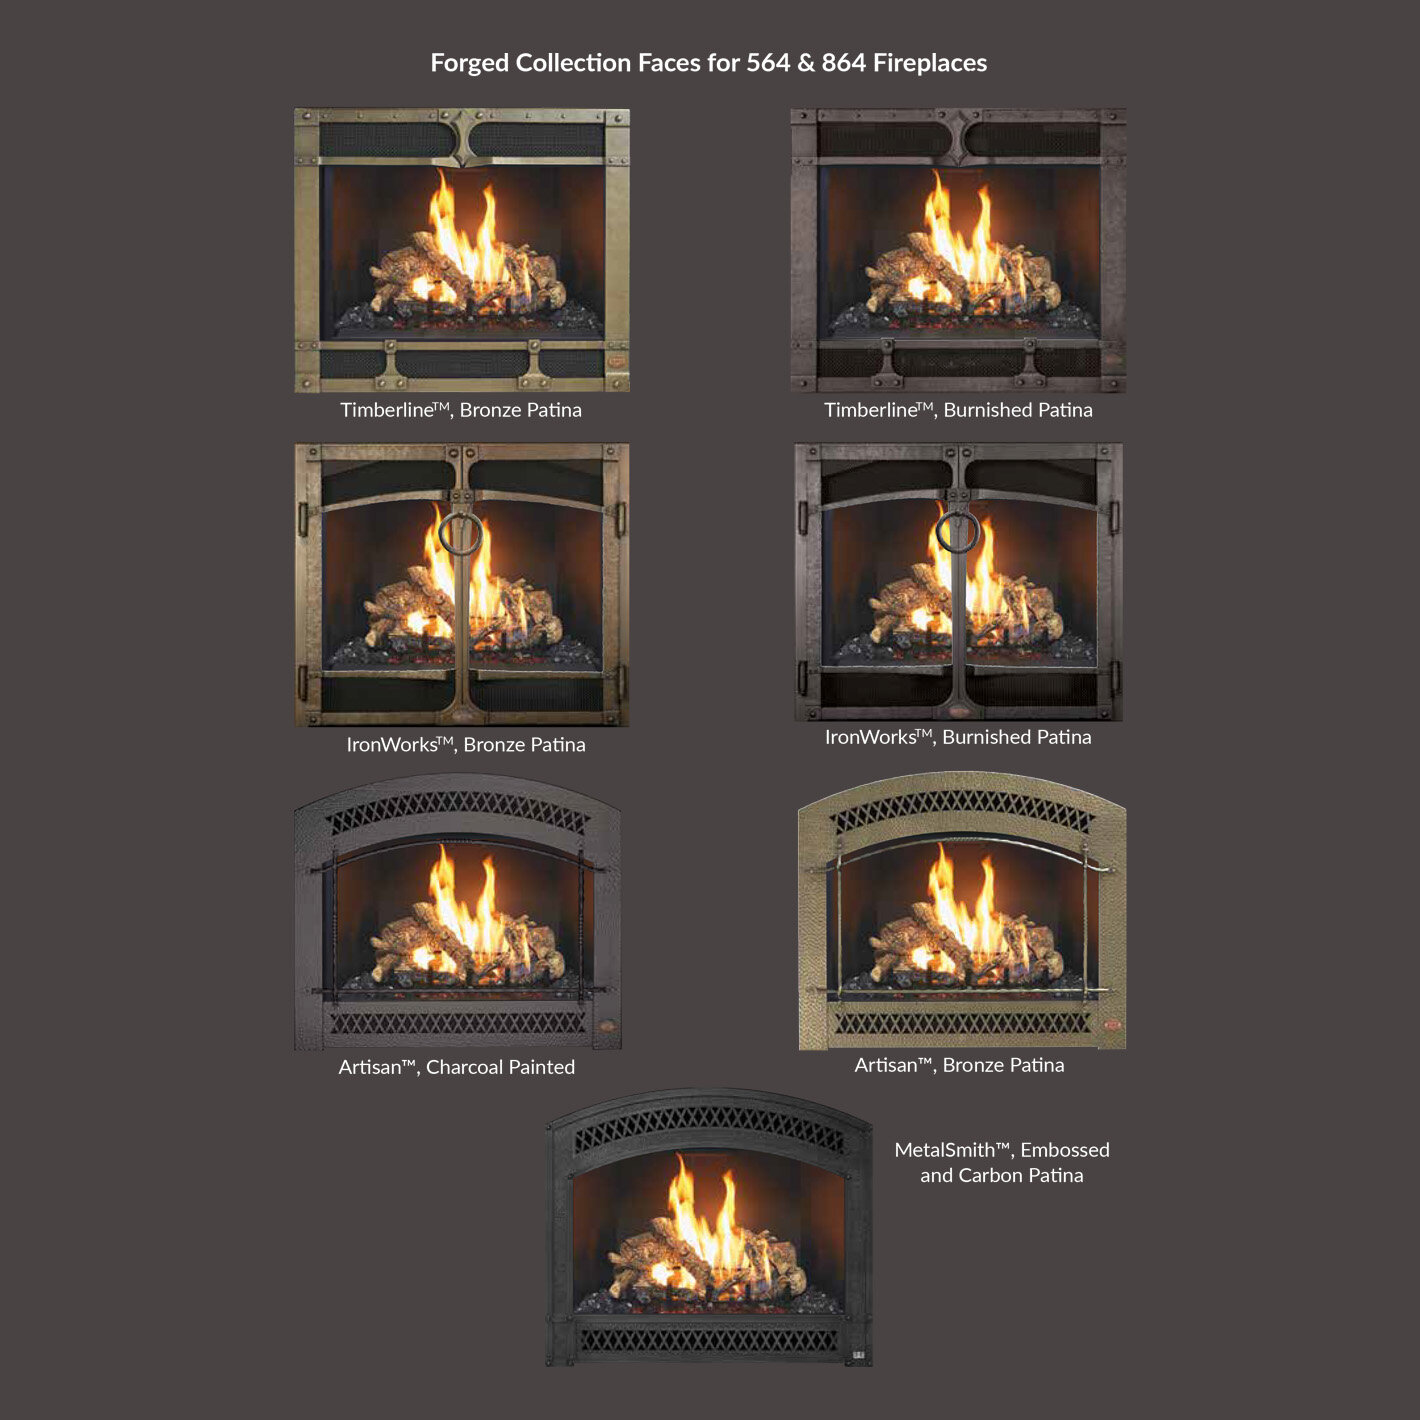 FireplacX Design Options 564 864 Forged Collection Faces.jpg